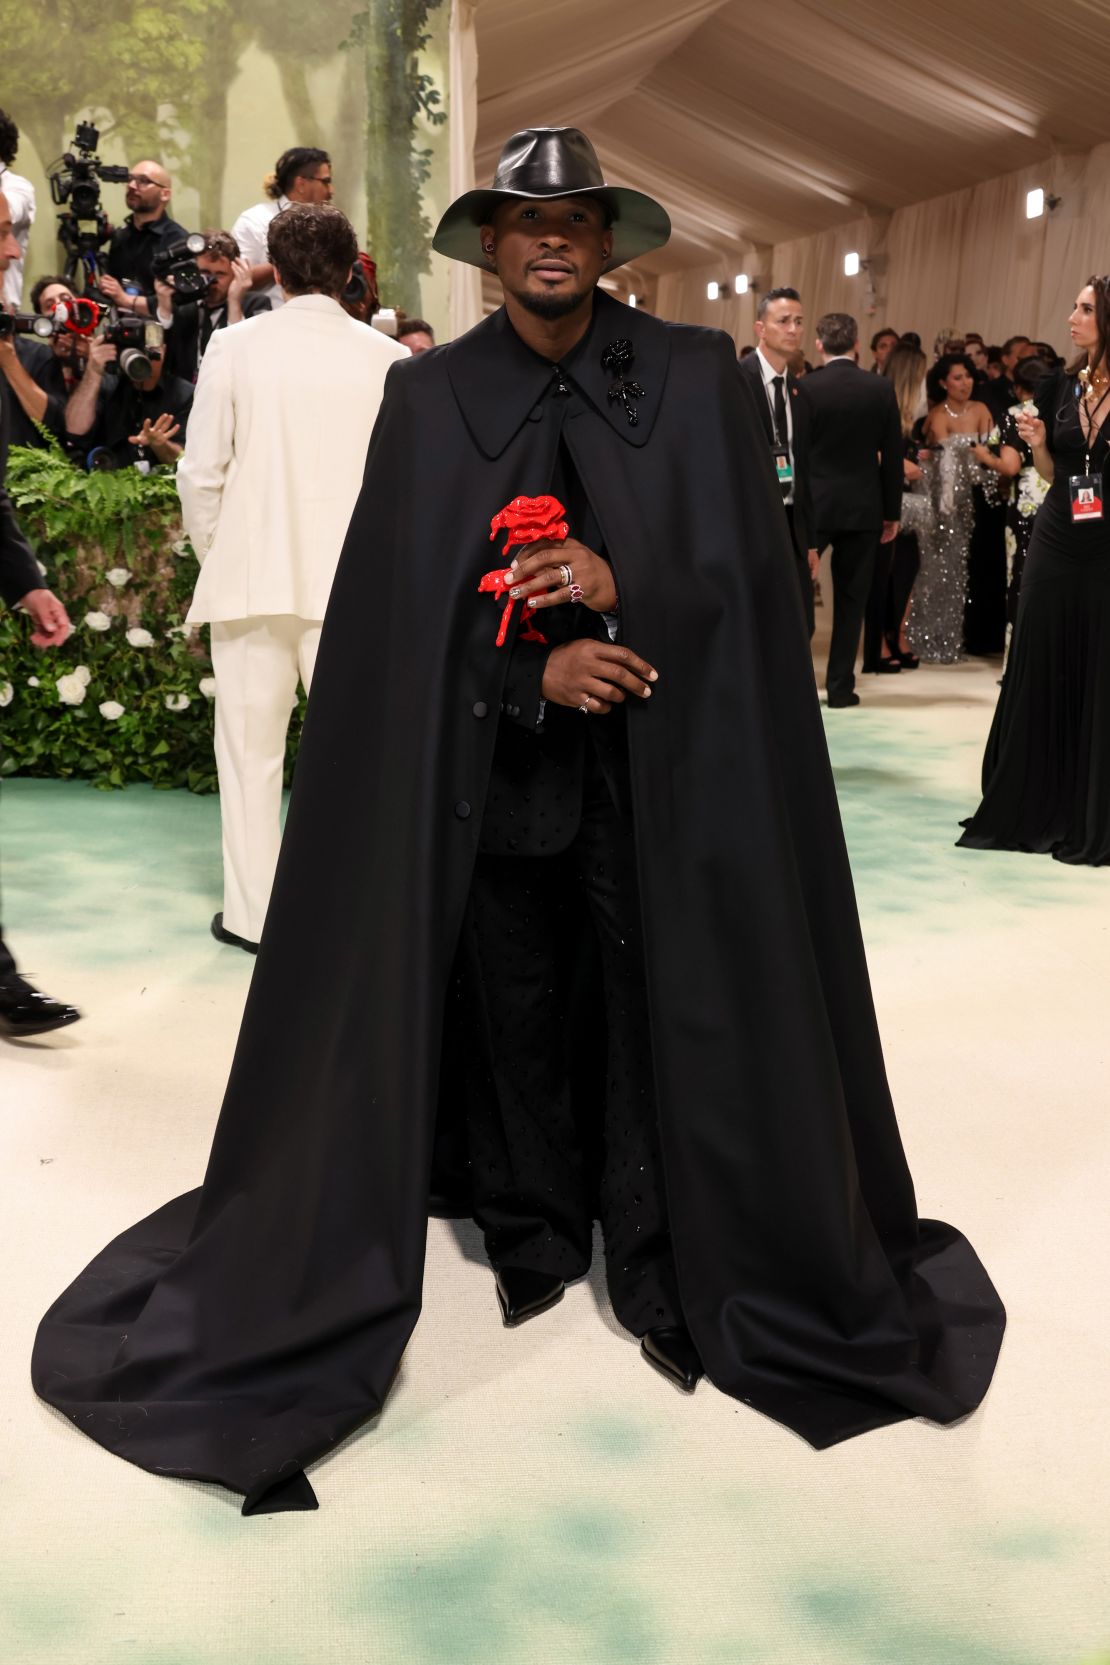 Usher's look was a melancholic take on florals, as he entered holding a singular bleeding rose.